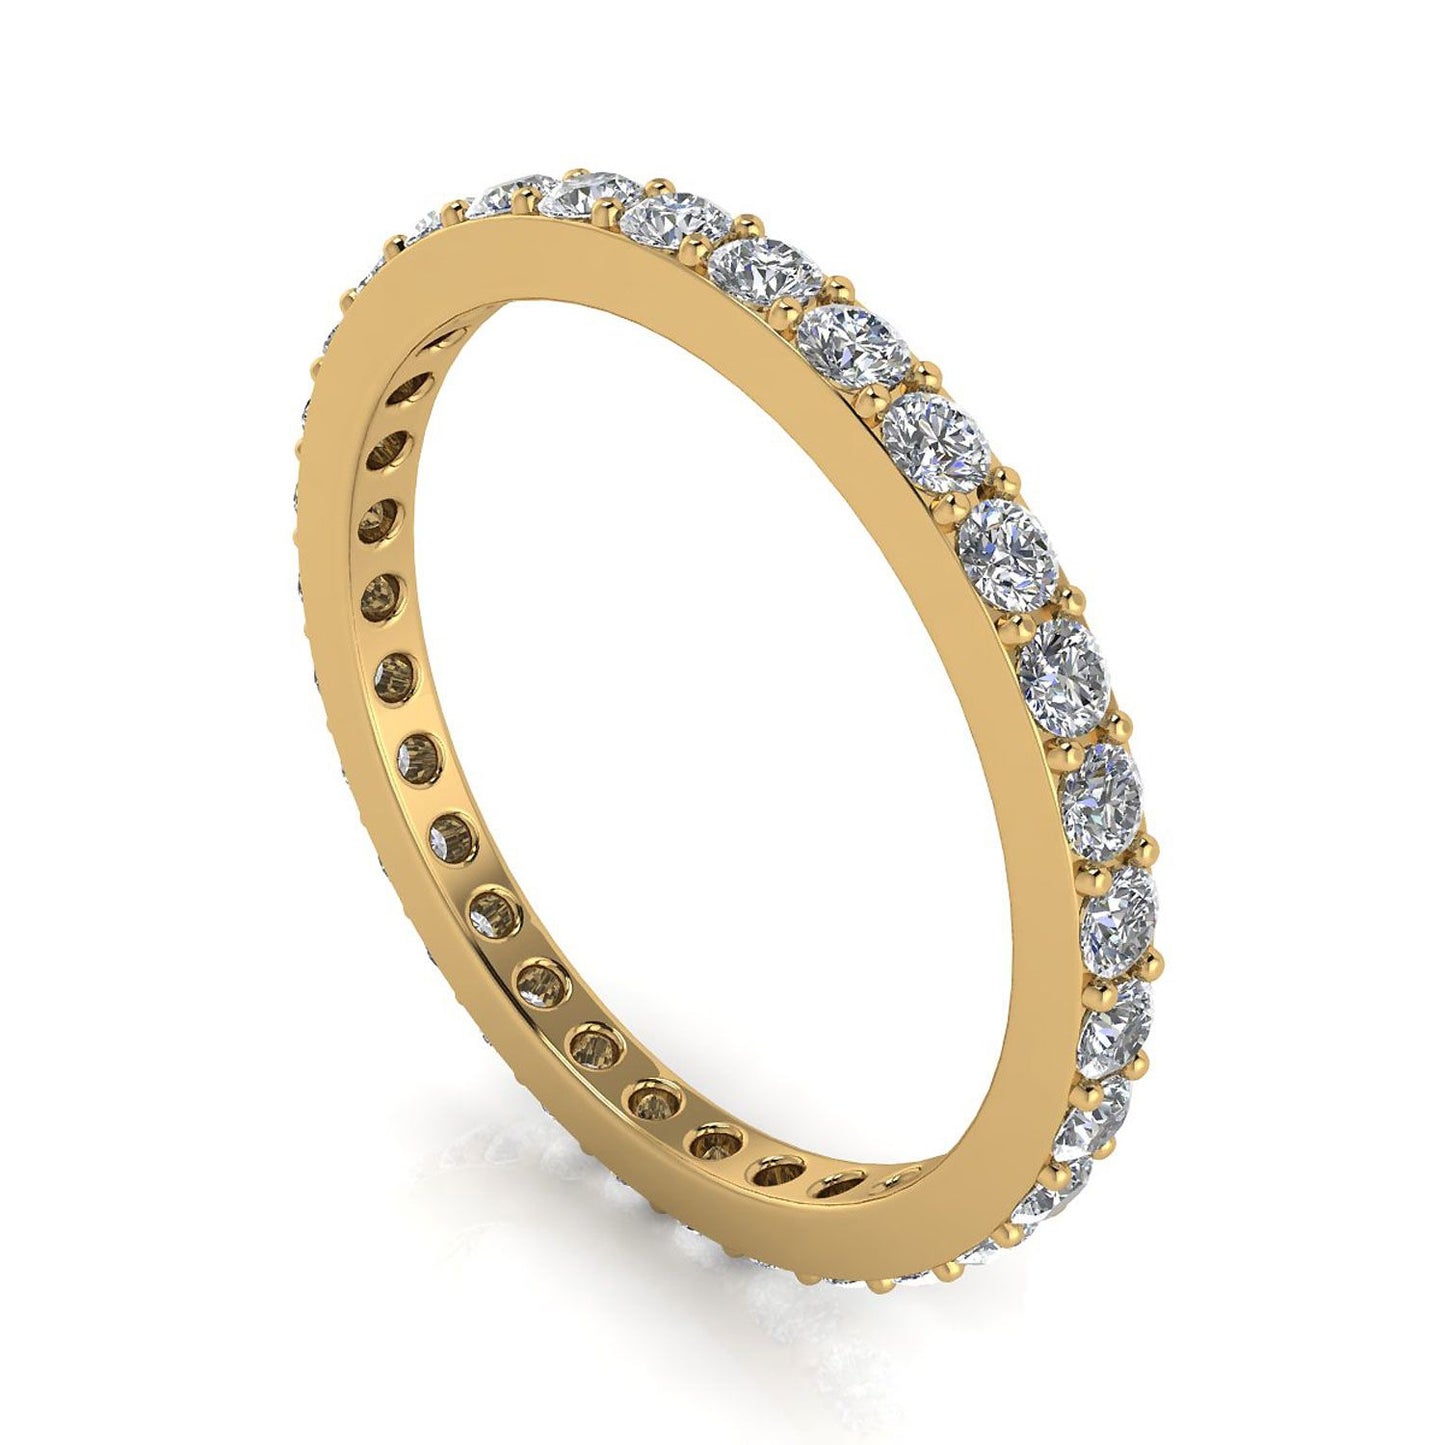 Round Brilliant Cut Diamond Pave Set Eternity Ring In 18k Yellow Gold  (0.51ct. Tw.) Ring Size 8.5